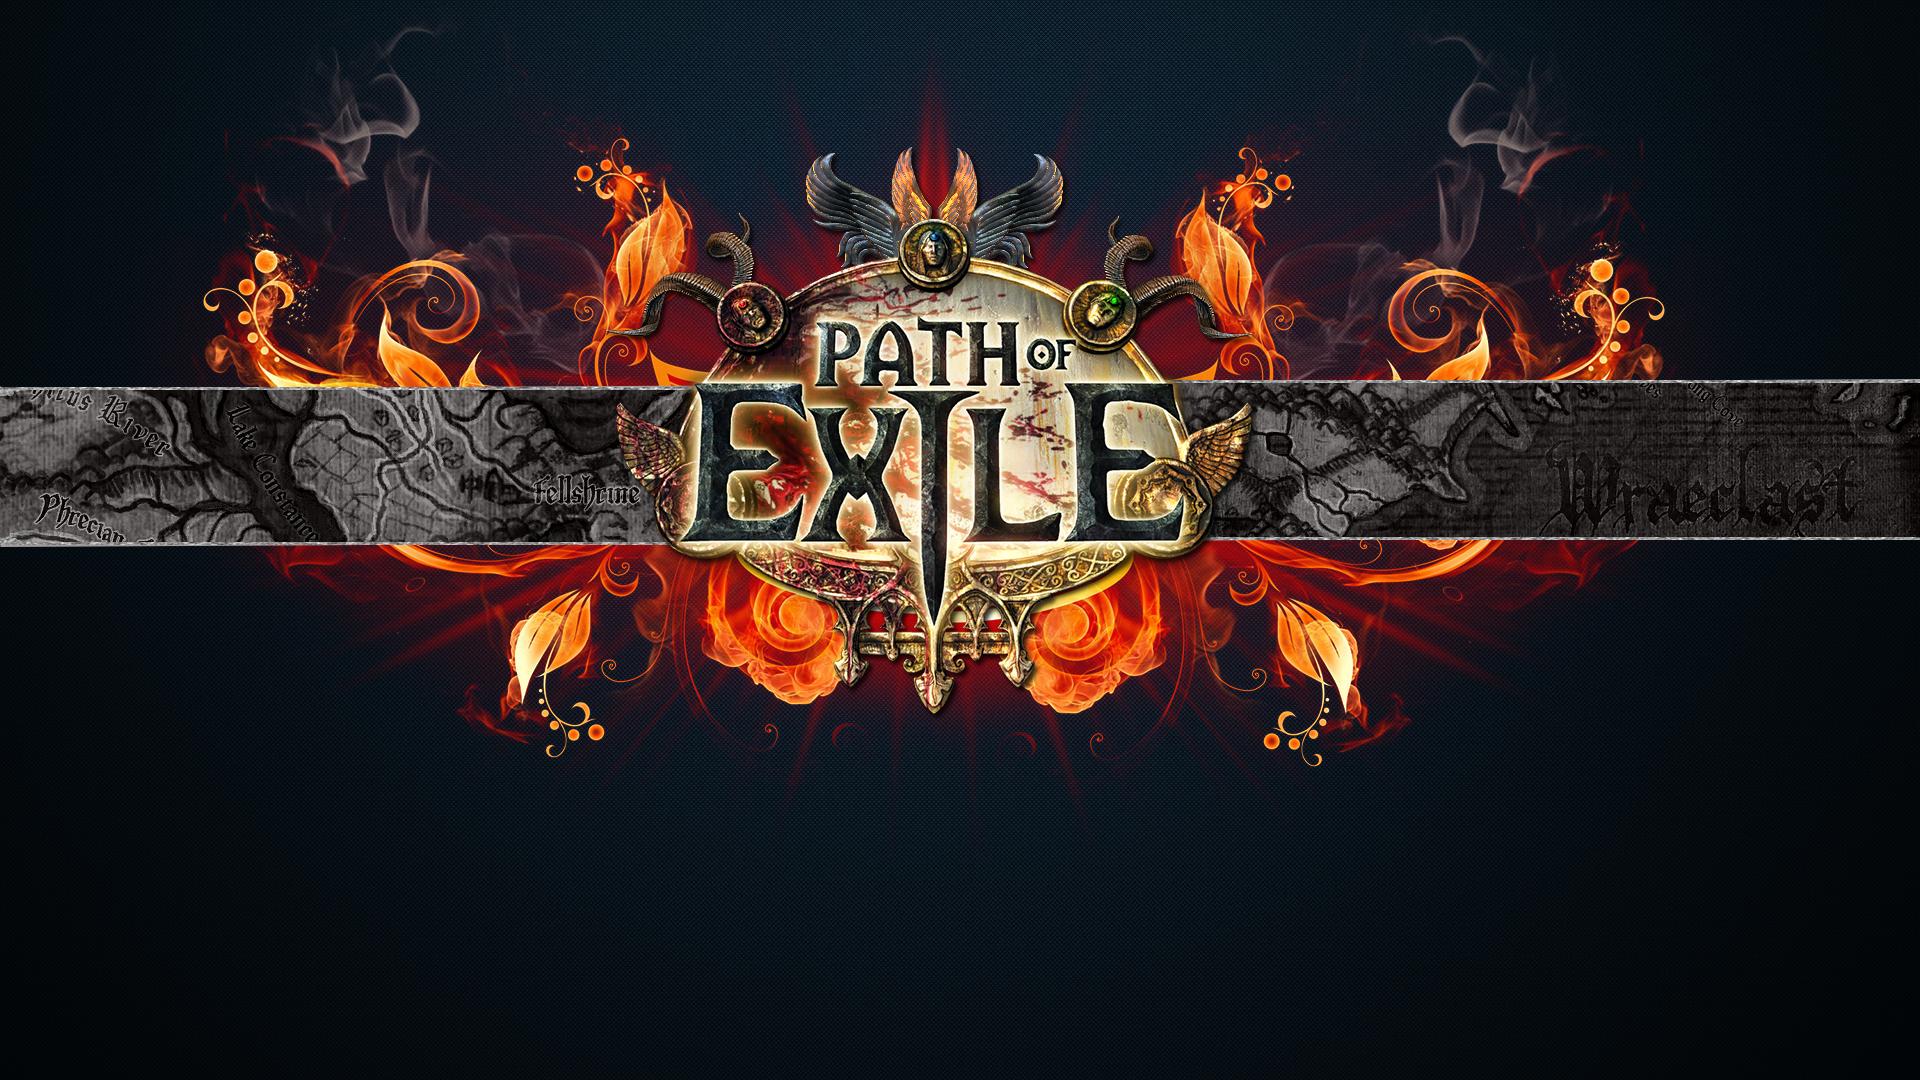 Cool Wallpapers path of exile, video game, mmorpg